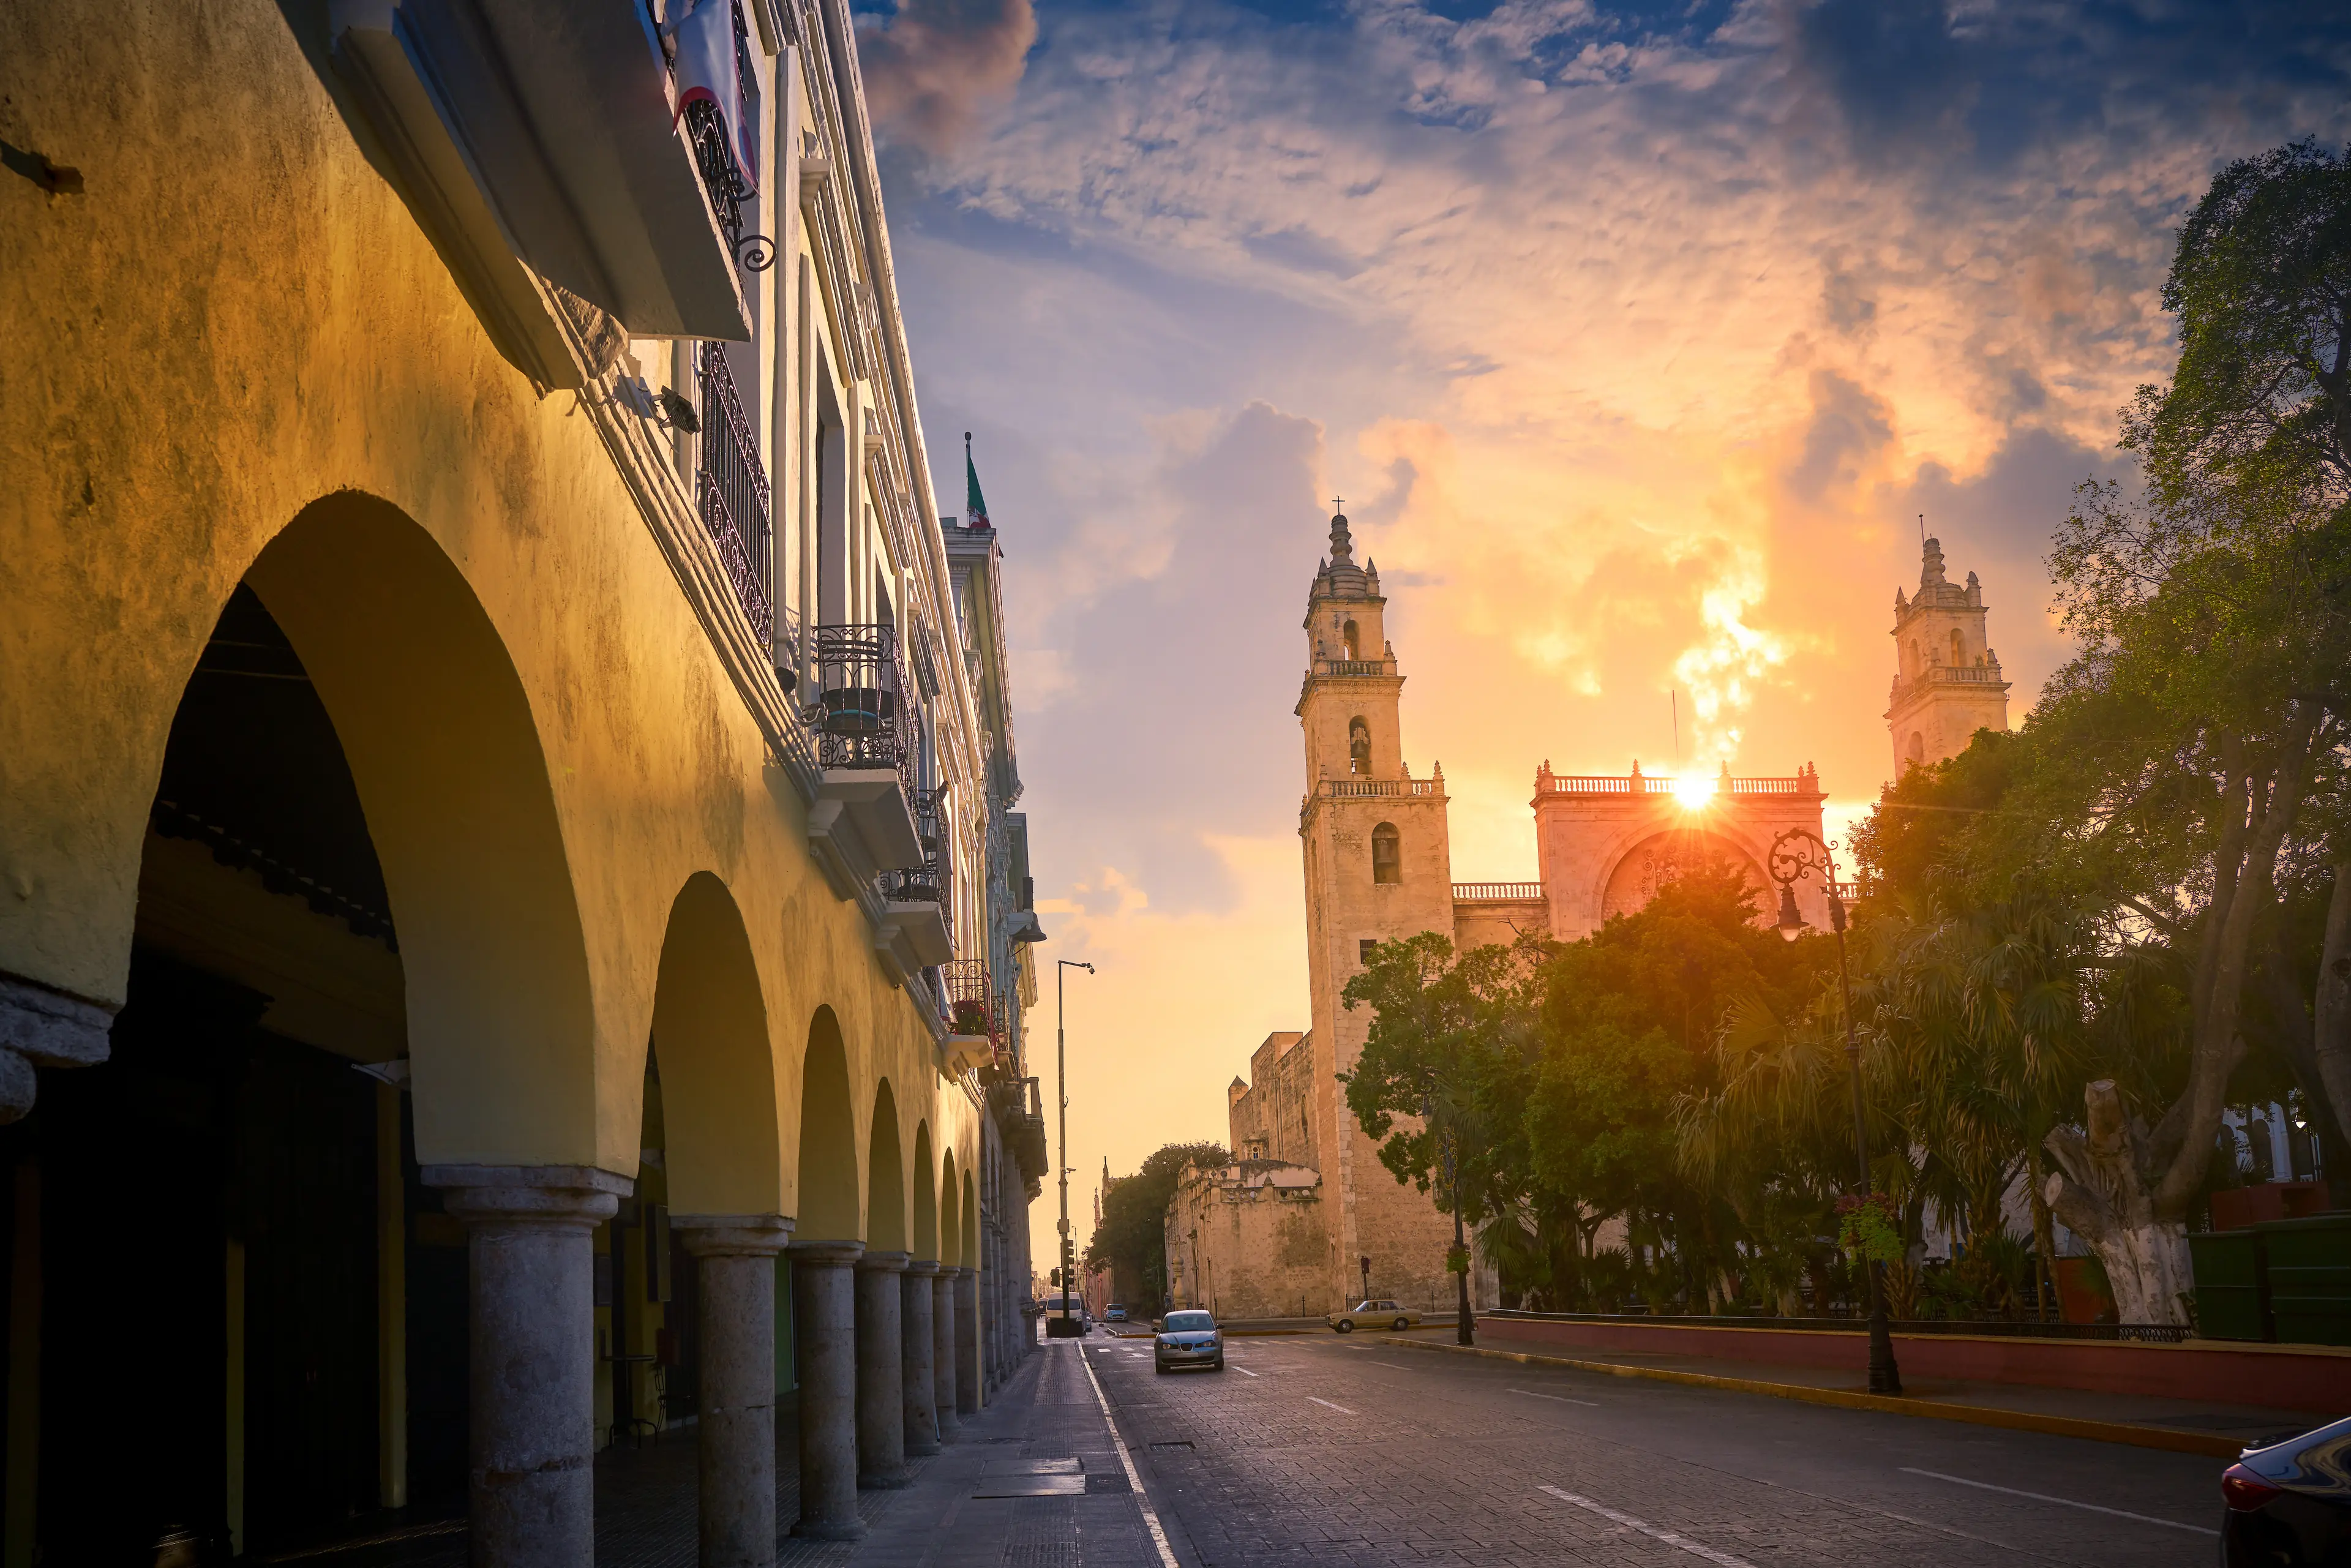 1-Day Solo Local Experience: Sightseeing, Food & Wine in Merida, Mexico